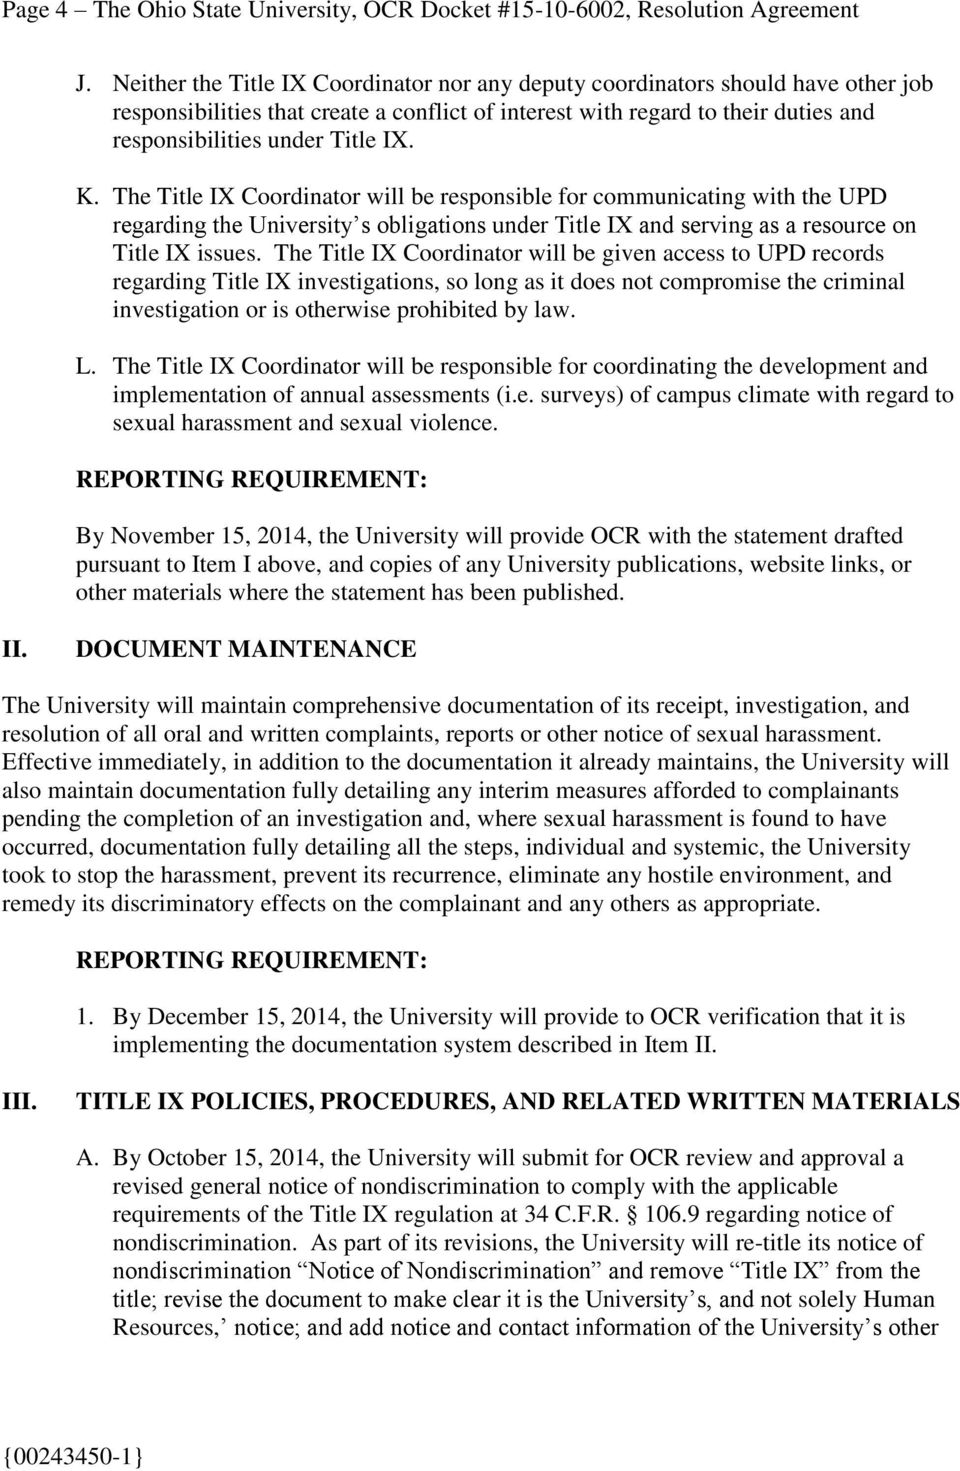 K. The Title IX Coordinator will be responsible for communicating with the UPD regarding the University s obligations under Title IX and serving as a resource on Title IX issues.